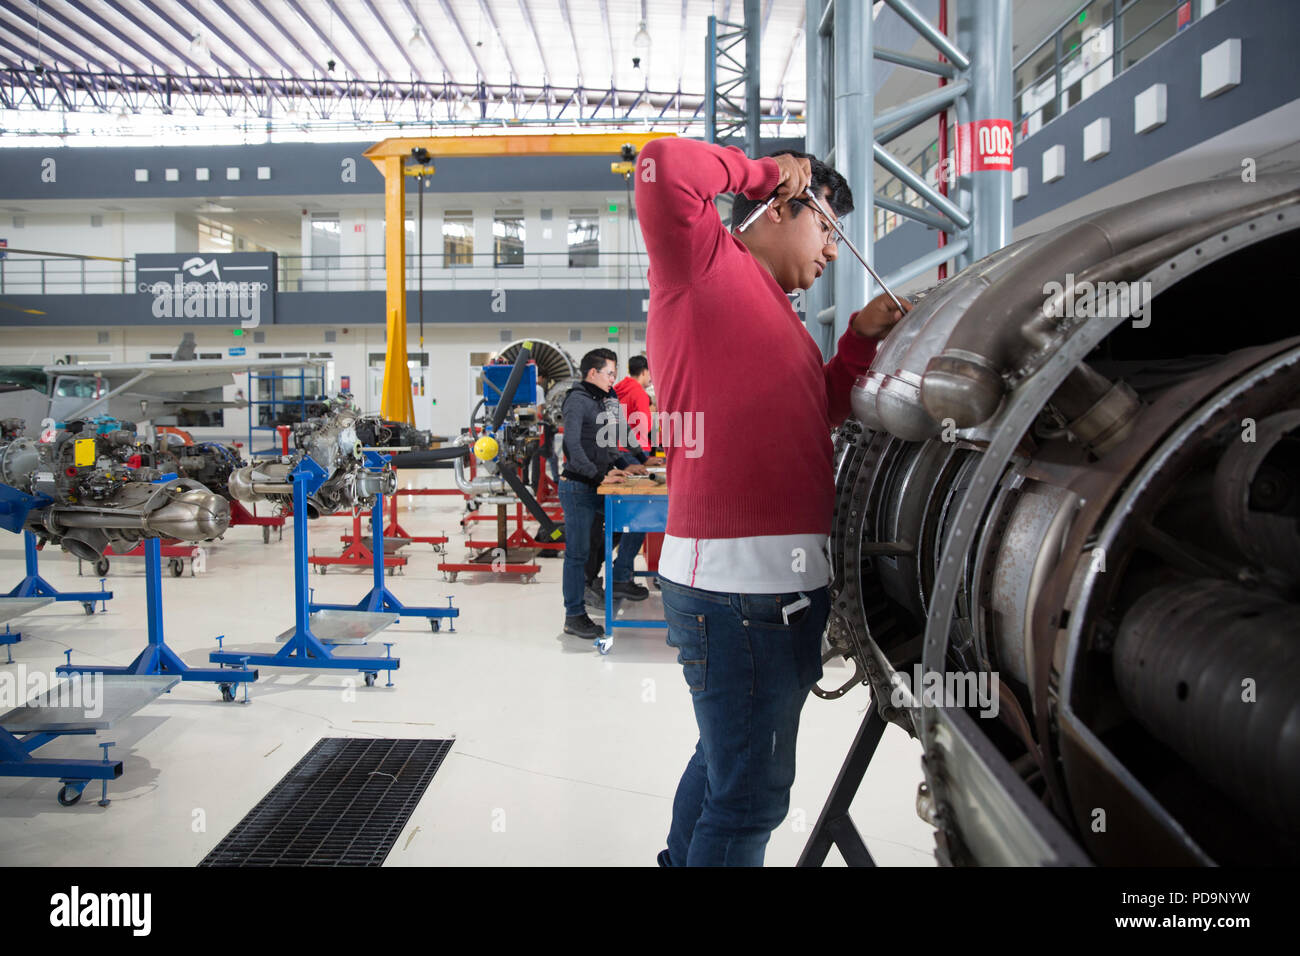 Students practice maintenance on various types of aircraft engines for the National Aeronautics University’s skilled technician training program at th Stock Photo